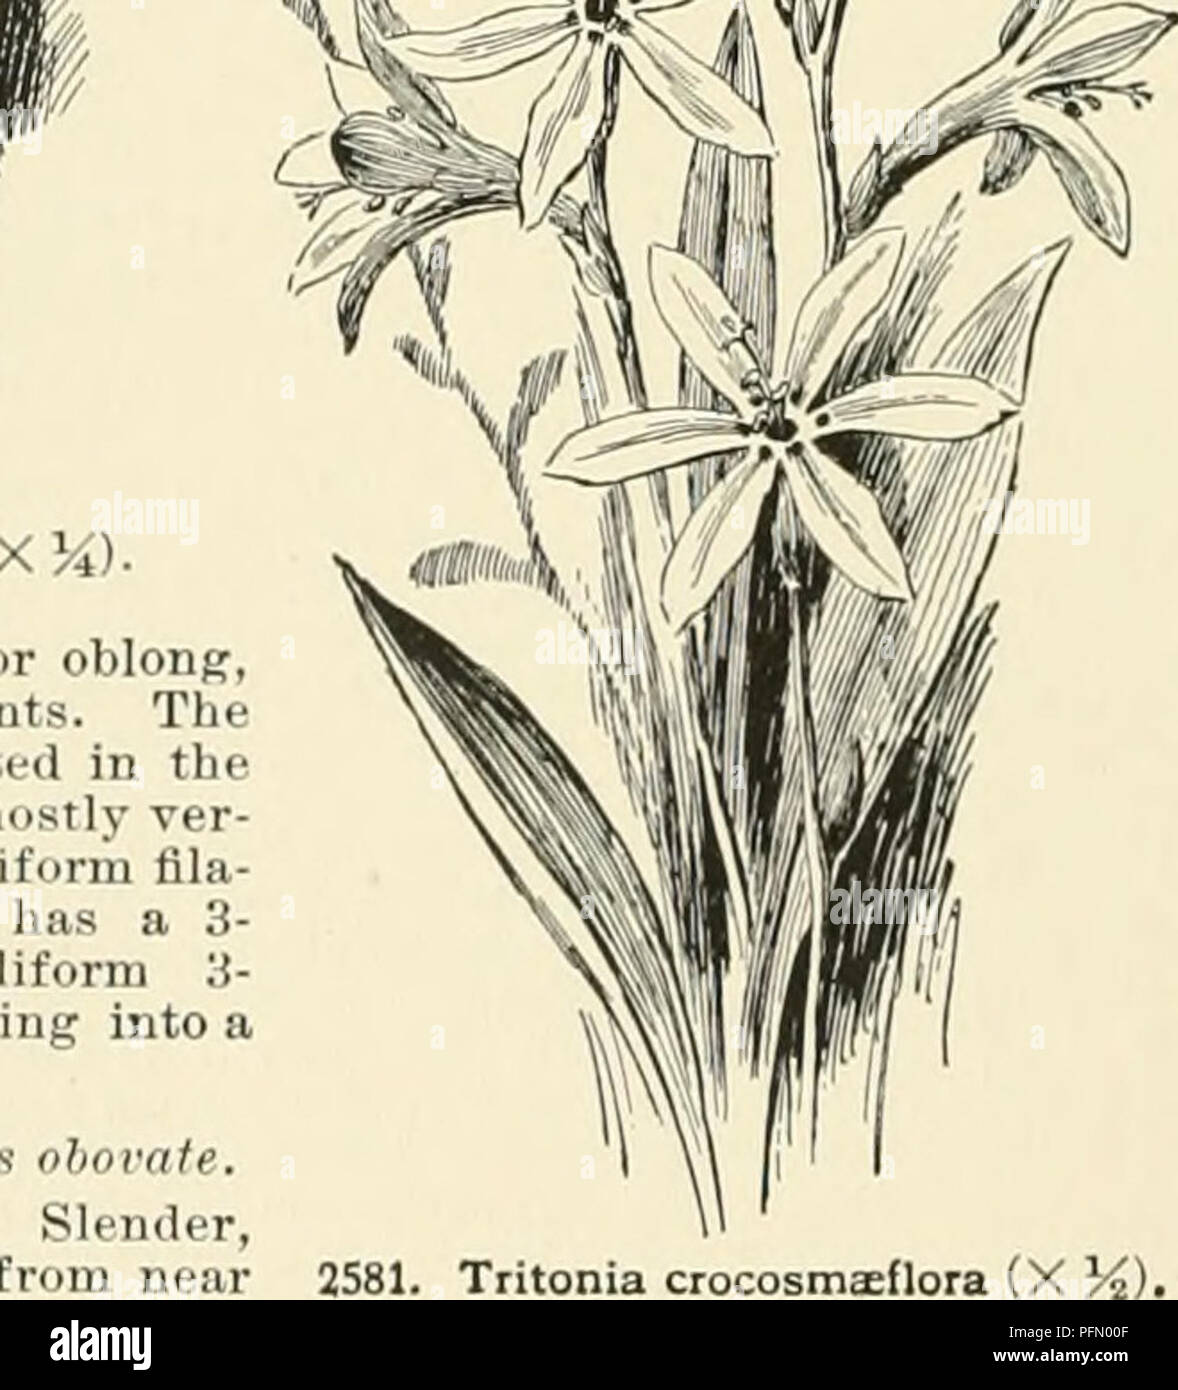 . Cyclopedia of American horticulture, comprising suggestions for cultivation of horticultural plants, descriptions of the species of fruits, vegetables, flowers, and ornamental plants sold in the United States and Canada, together with geographical and biographical sketches. Gardening. VfU I. Tritonia Pottsi (X K). ing limb of obovate or oblong nearly equal segments. Tlu stamens are 3, inserted in th( branched st le, npeni: 3-valved capsule. A. Perianth-segments crocita, Ker-Gawl. Slender, simple or branched from the base, bearing few fls. in loose 1-sided racemes: fl. about 2 in. across, ta Stock Photo